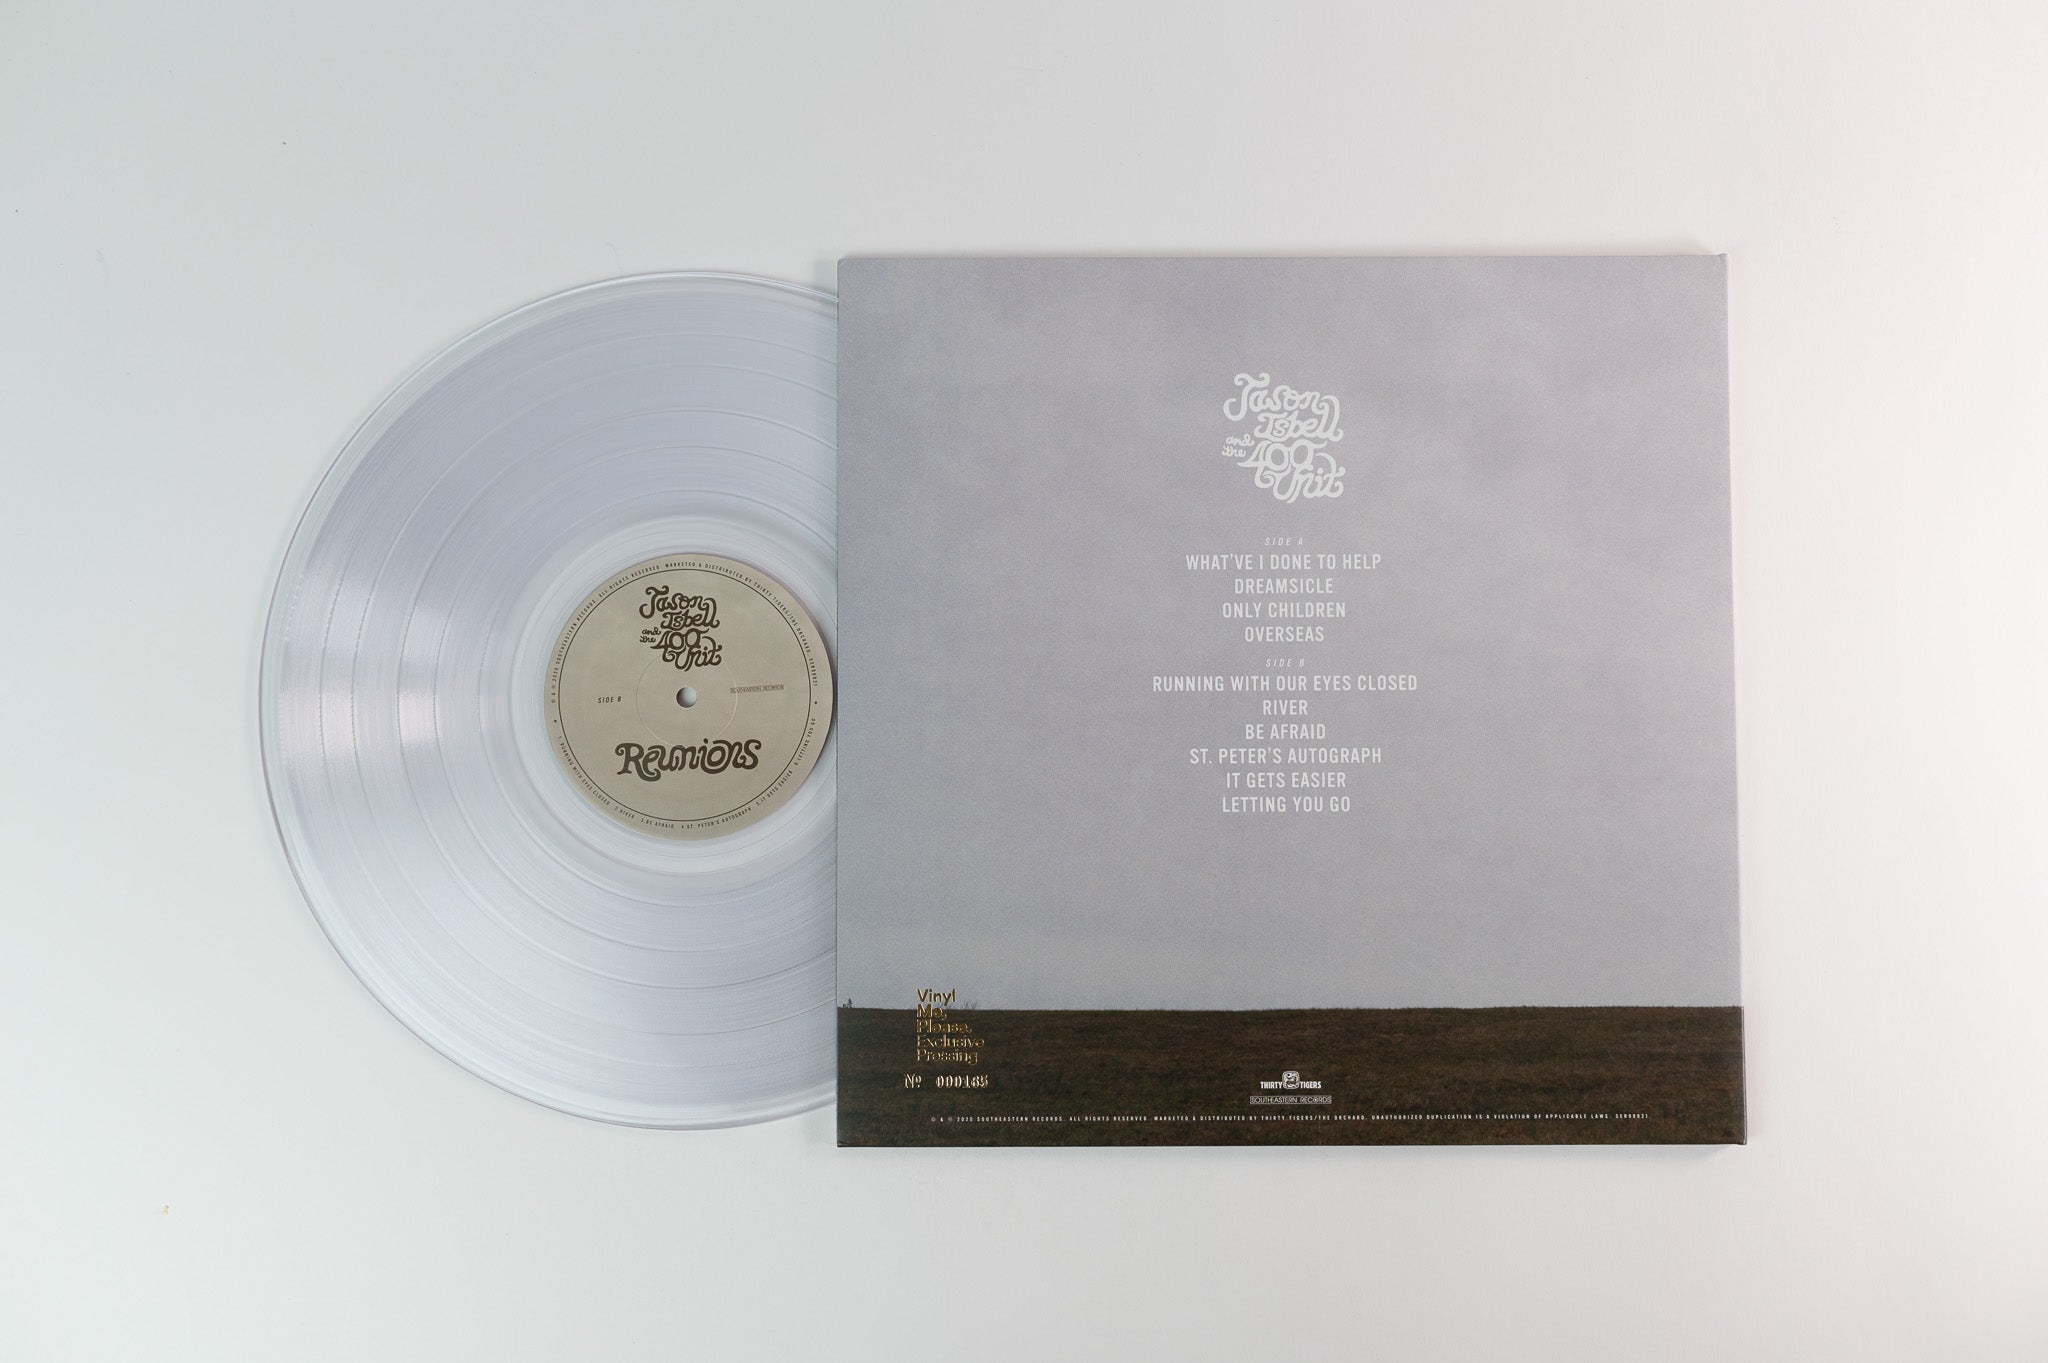 Jason Isbell And The 400 Unit - Reunions on Southeastern Vinyl Me Please Ltd Numbered Clear